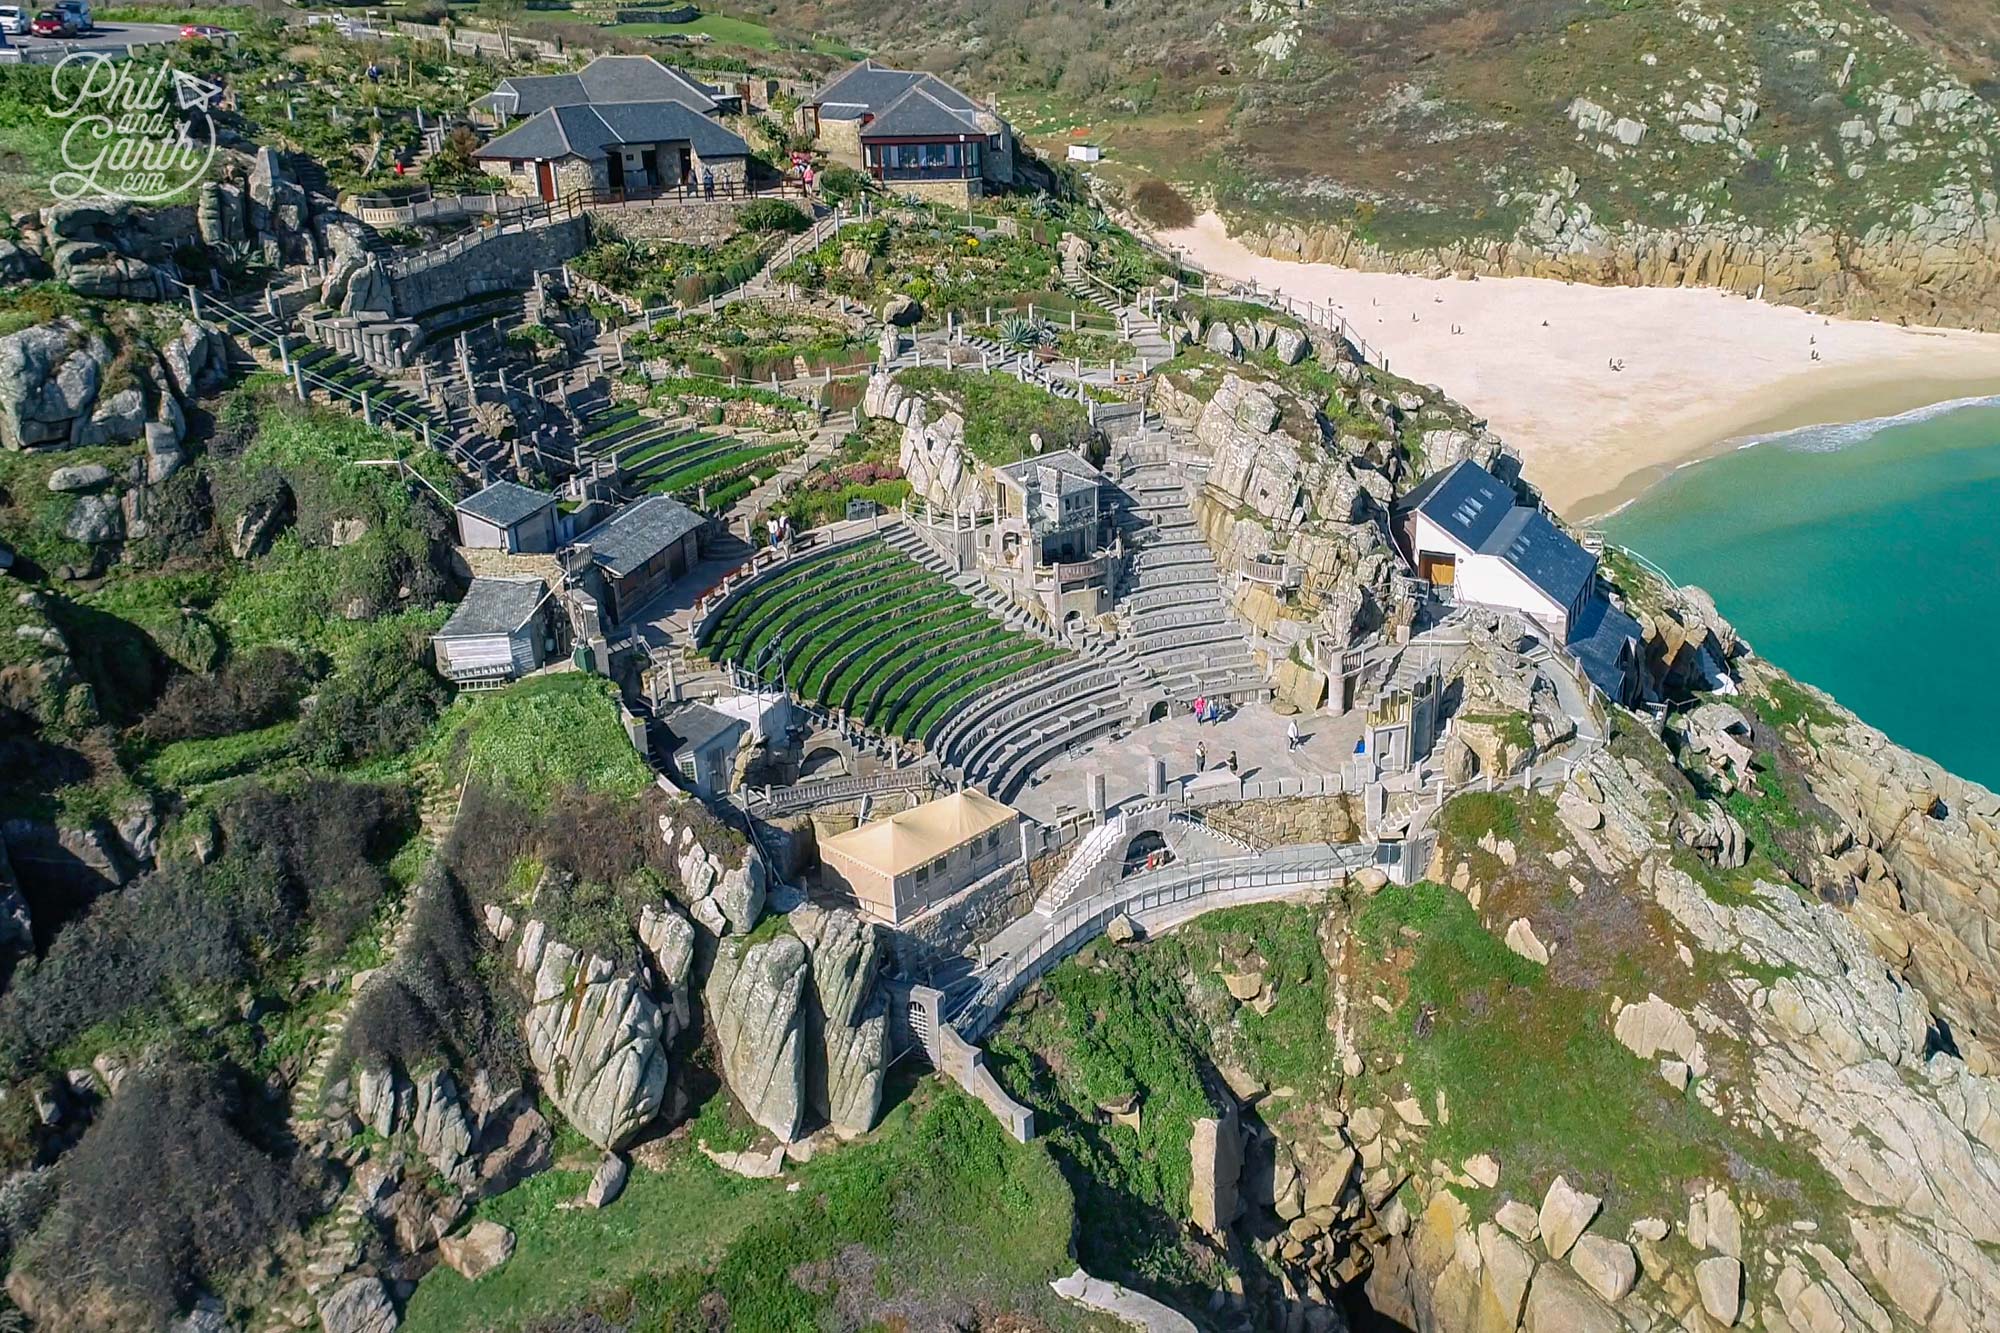 The Minack Theatre as seen from a drone